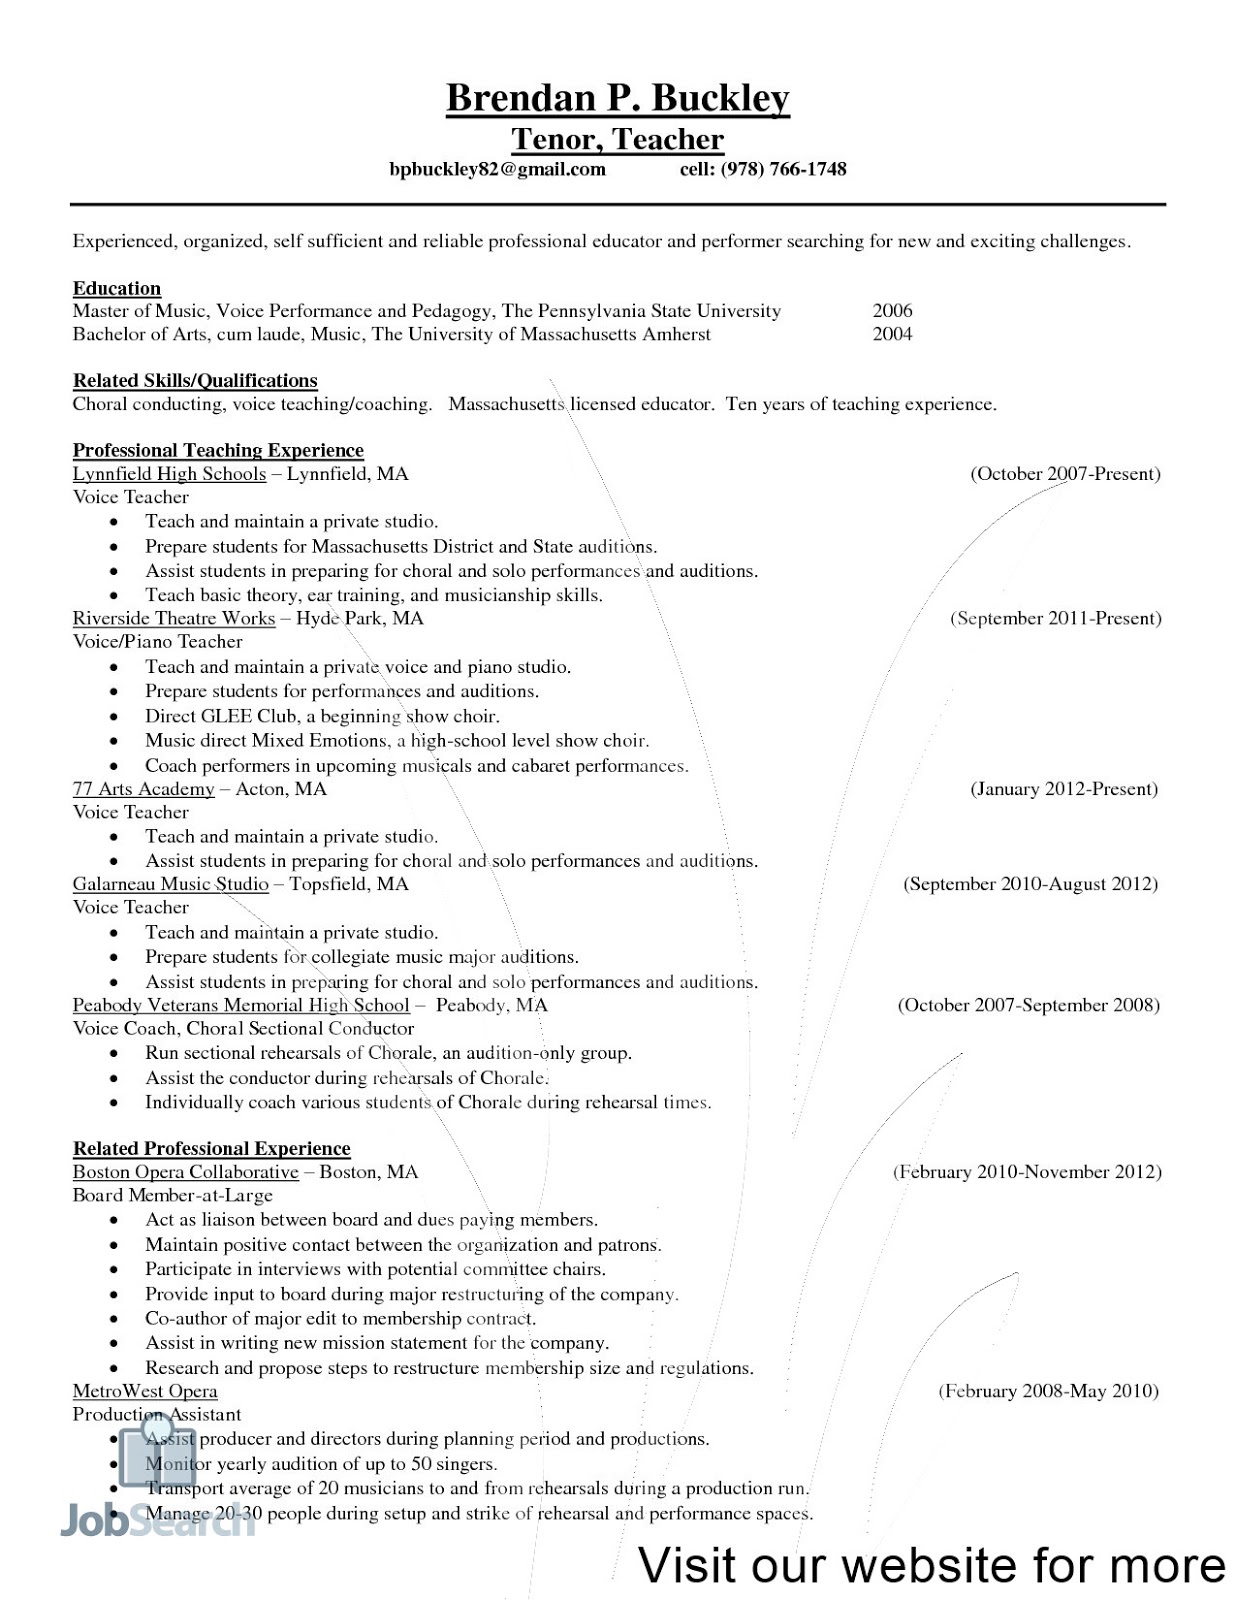 example resumes for jobs example resume for jobs example resumes for jobs without experience example resume for job example resume for job application sample resume for usa jobs